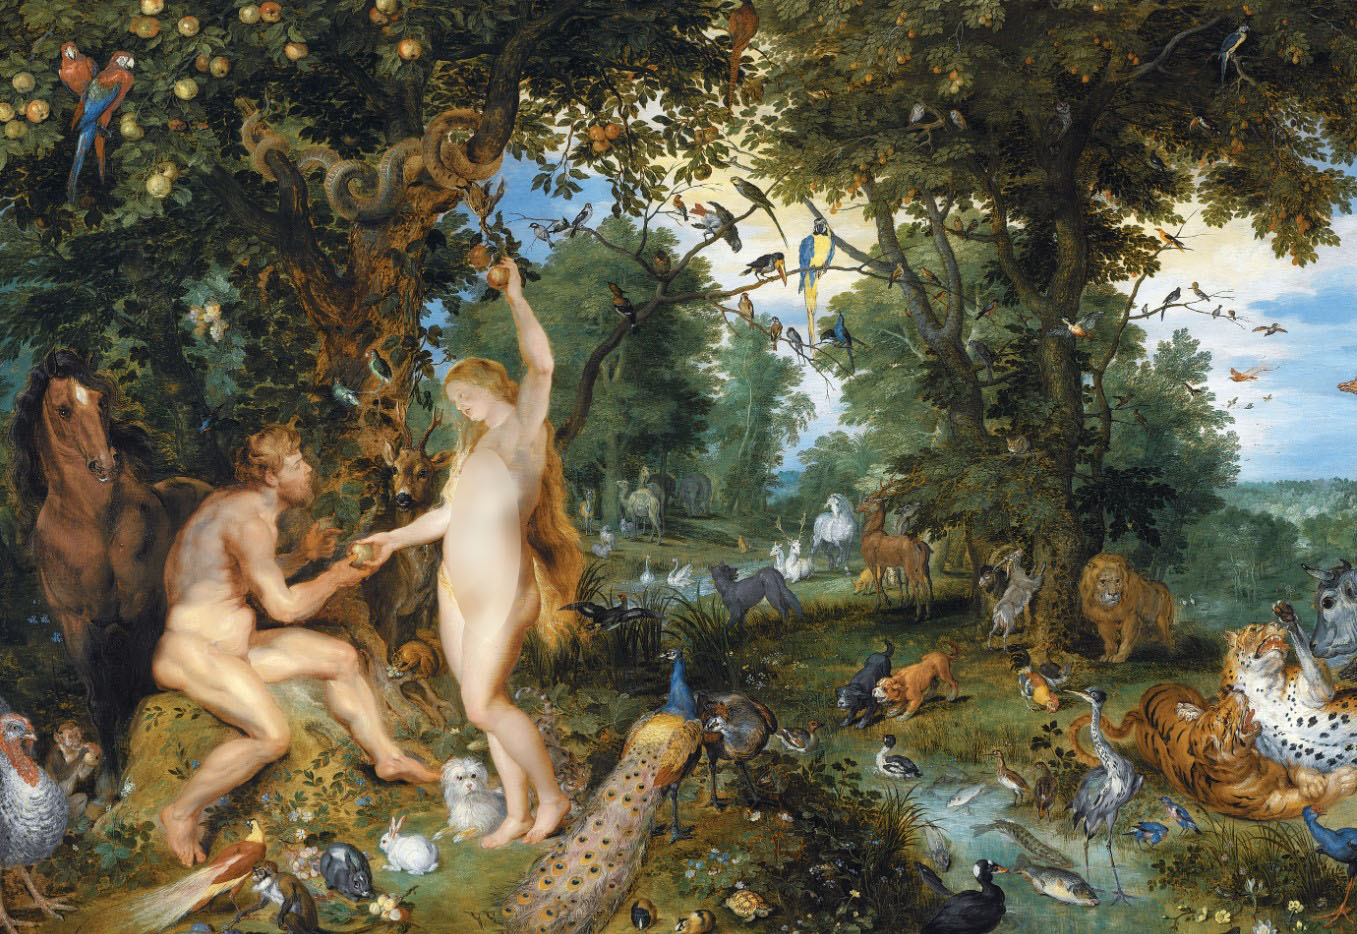 People are just learning where exactly The Garden of Eden is 5